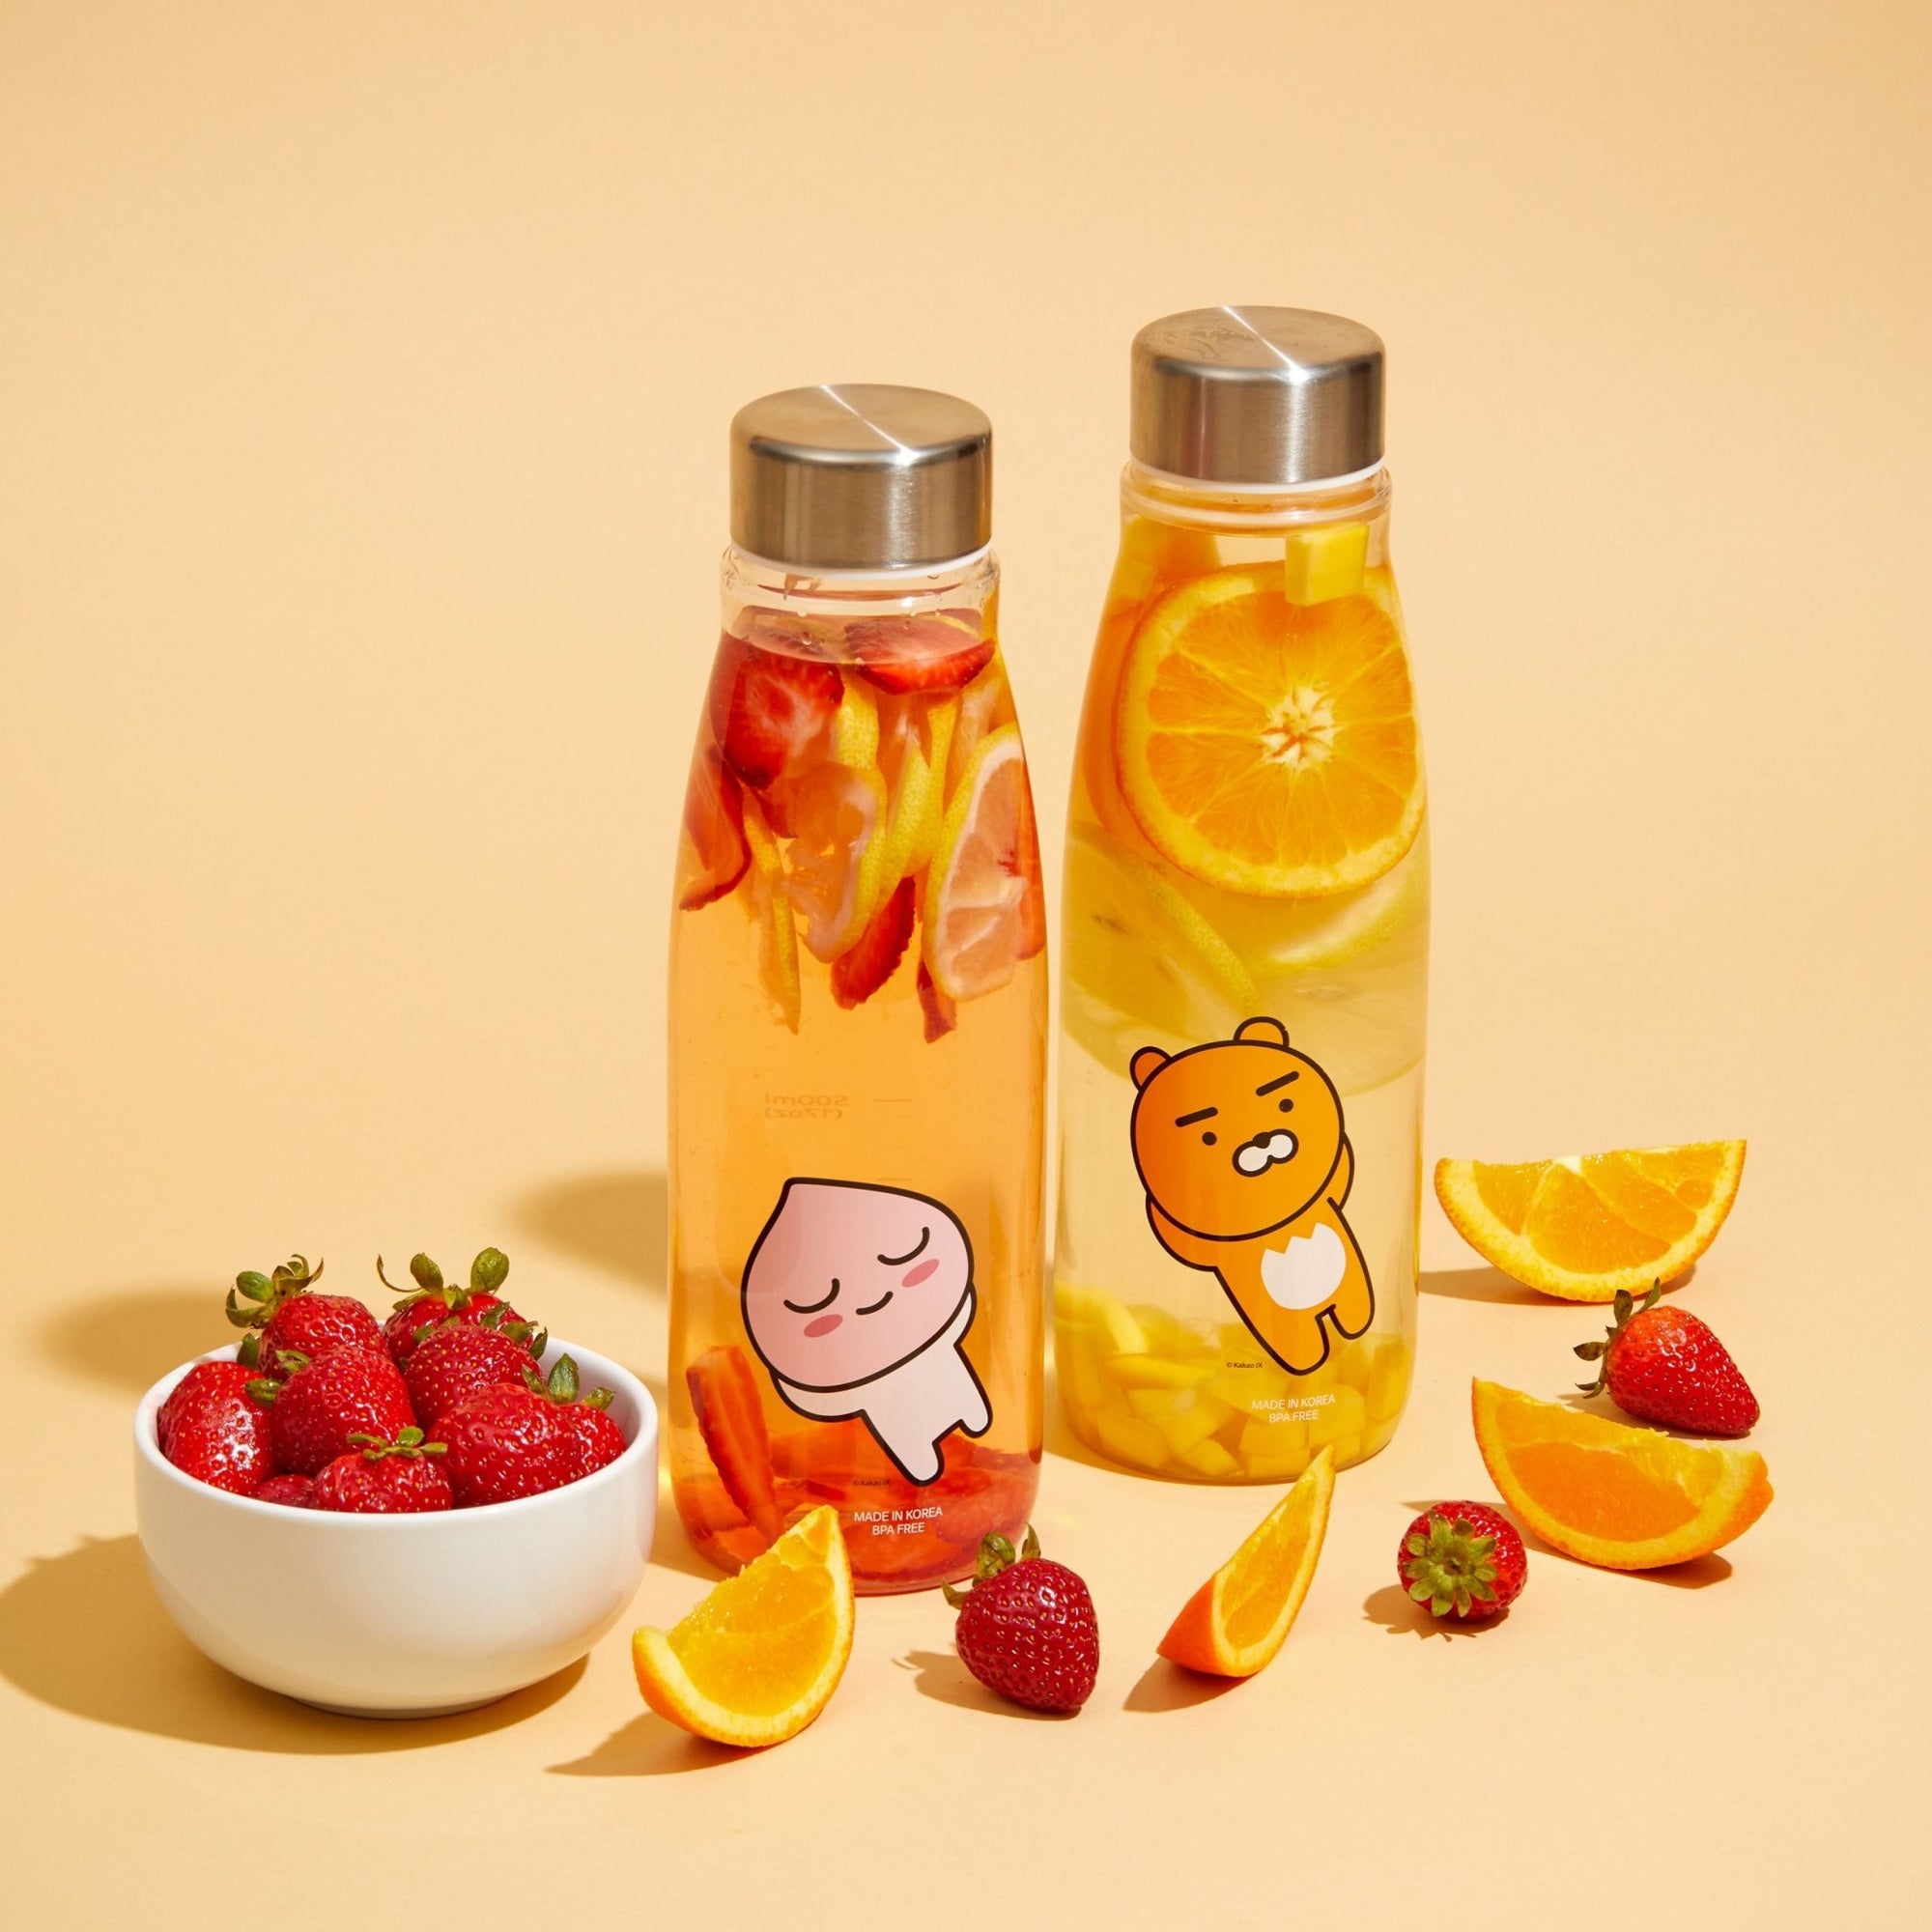 https://cdn.shopify.com/s/files/1/0618/9383/6986/products/kakao-friends-cute-character-bpa-free-non-toxic-tritan-stainless-steel-cap-water-bottle-676891_2000x.jpg?v=1664244108